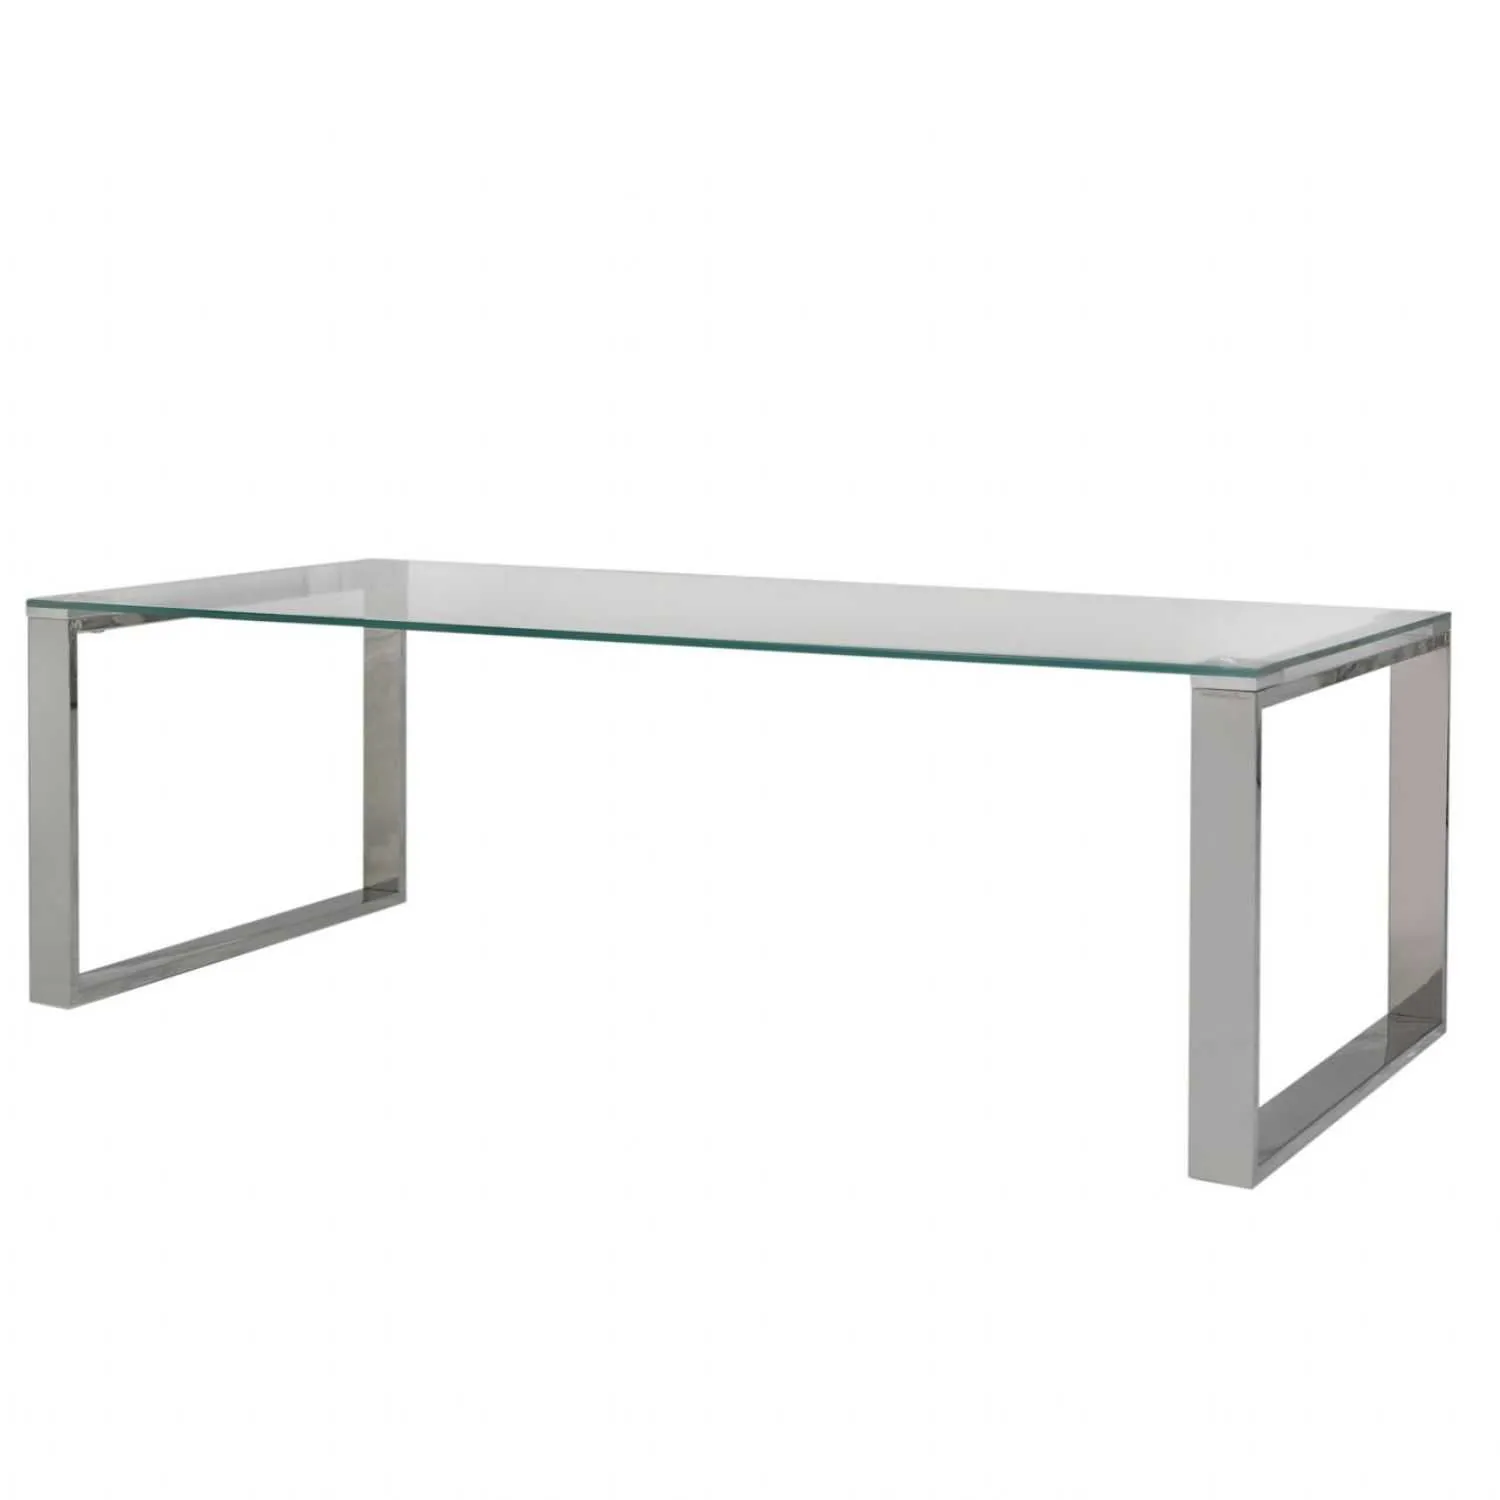 Henry Coffee Table Stainless Steel And Glass